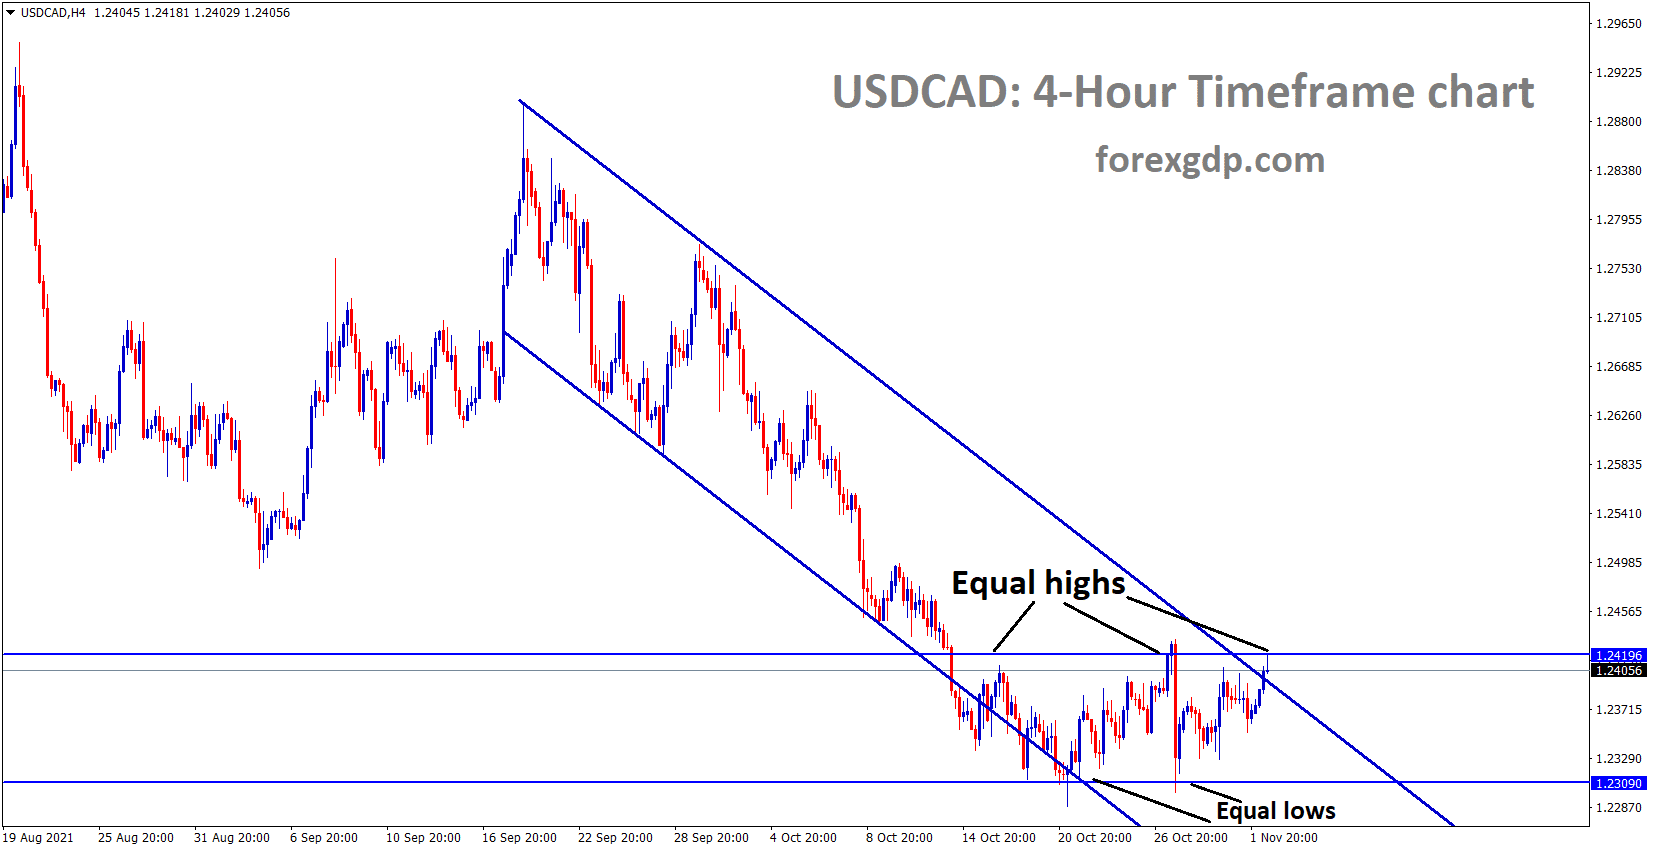 USDCAD is moving at the Descending channel and market price is long time consolidates inside equal highs and equal low areas.